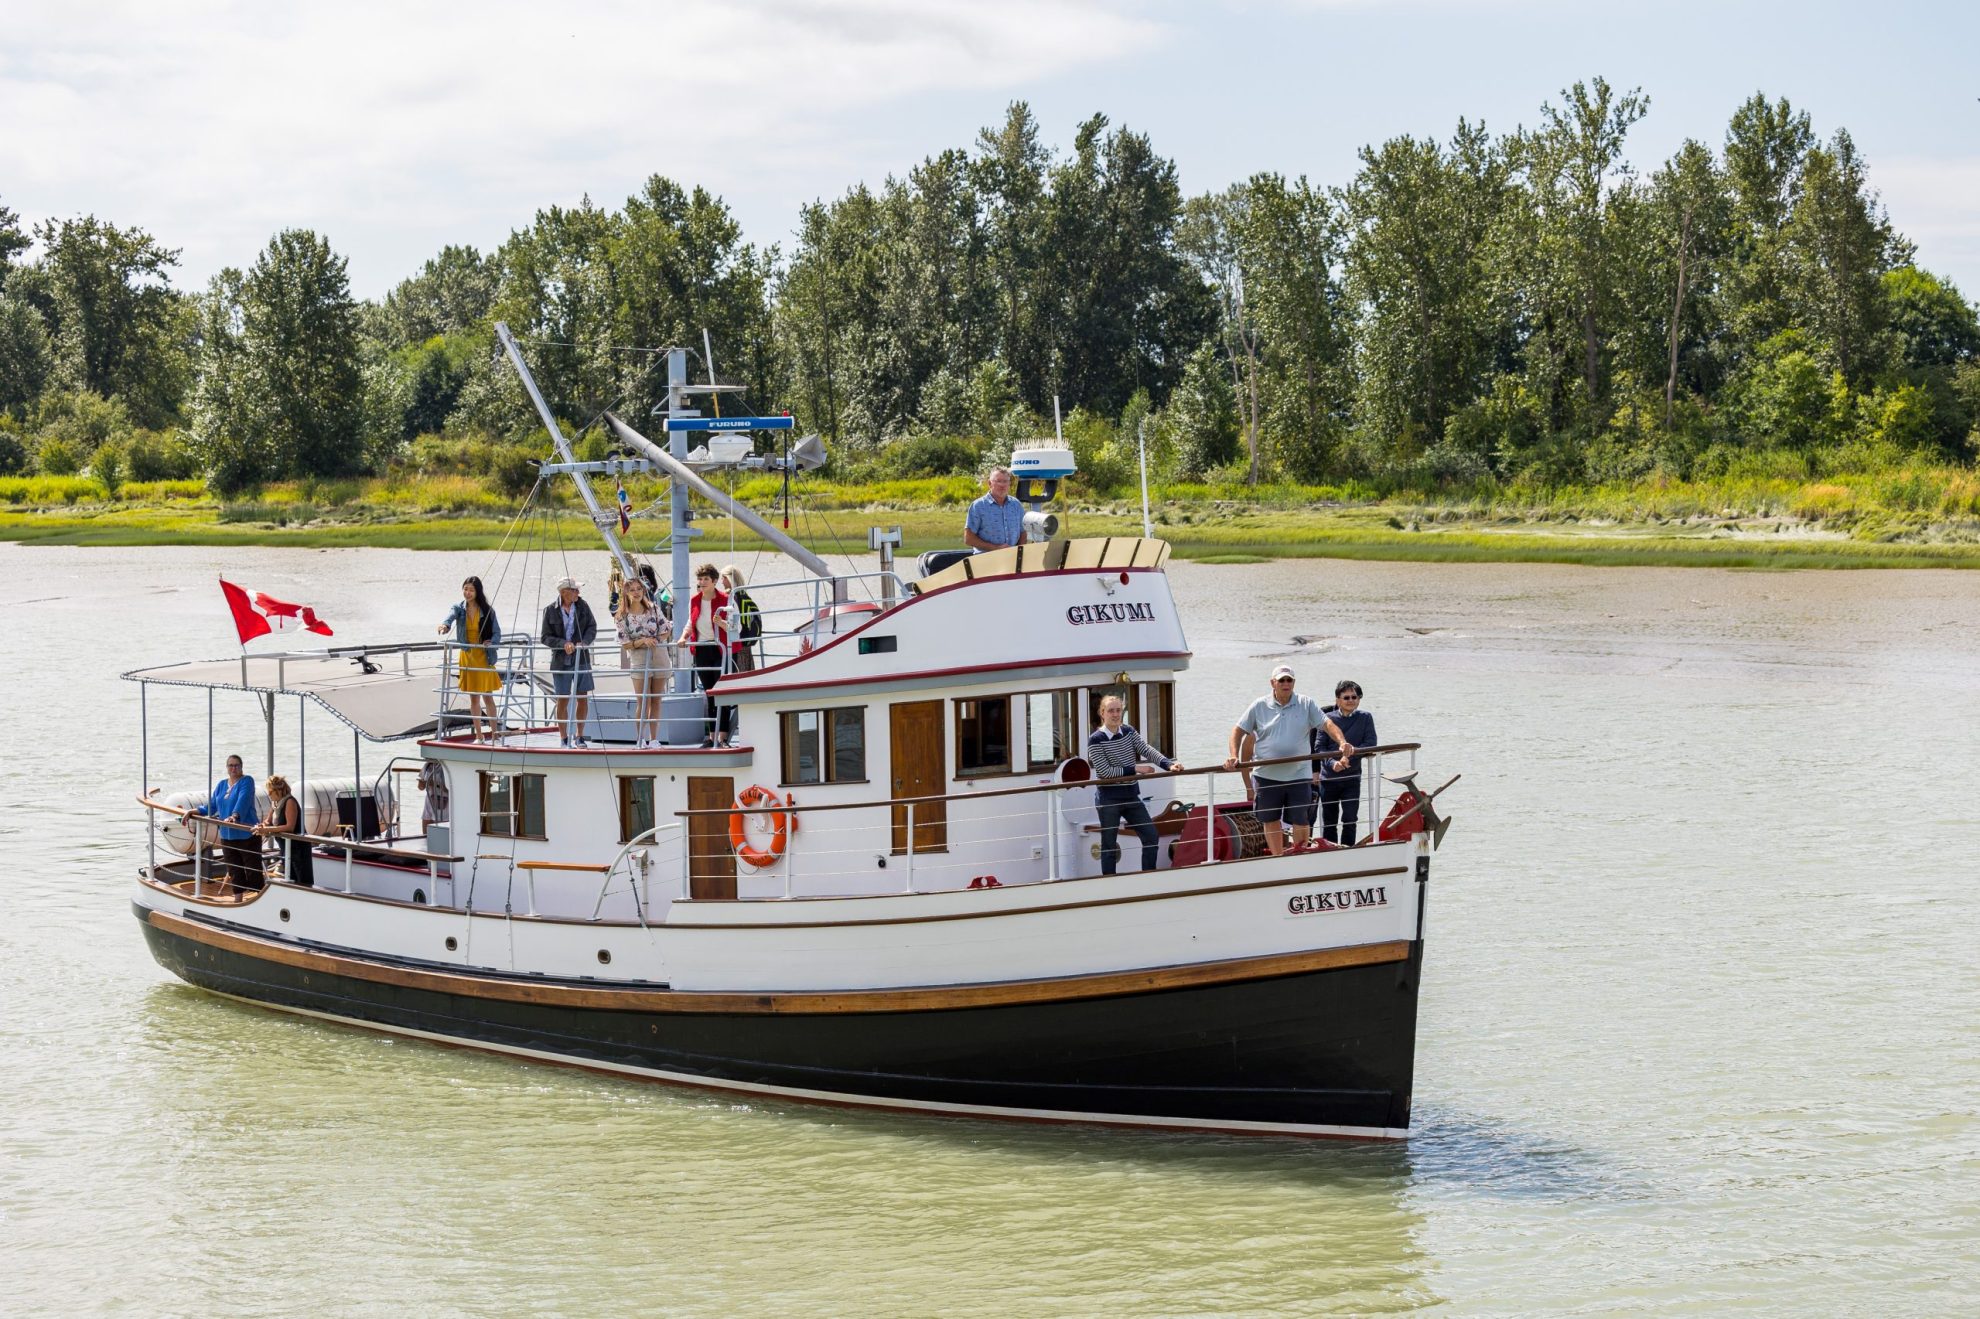 Wooden boat carrying passengers on the green-gray waters of the Fraser River